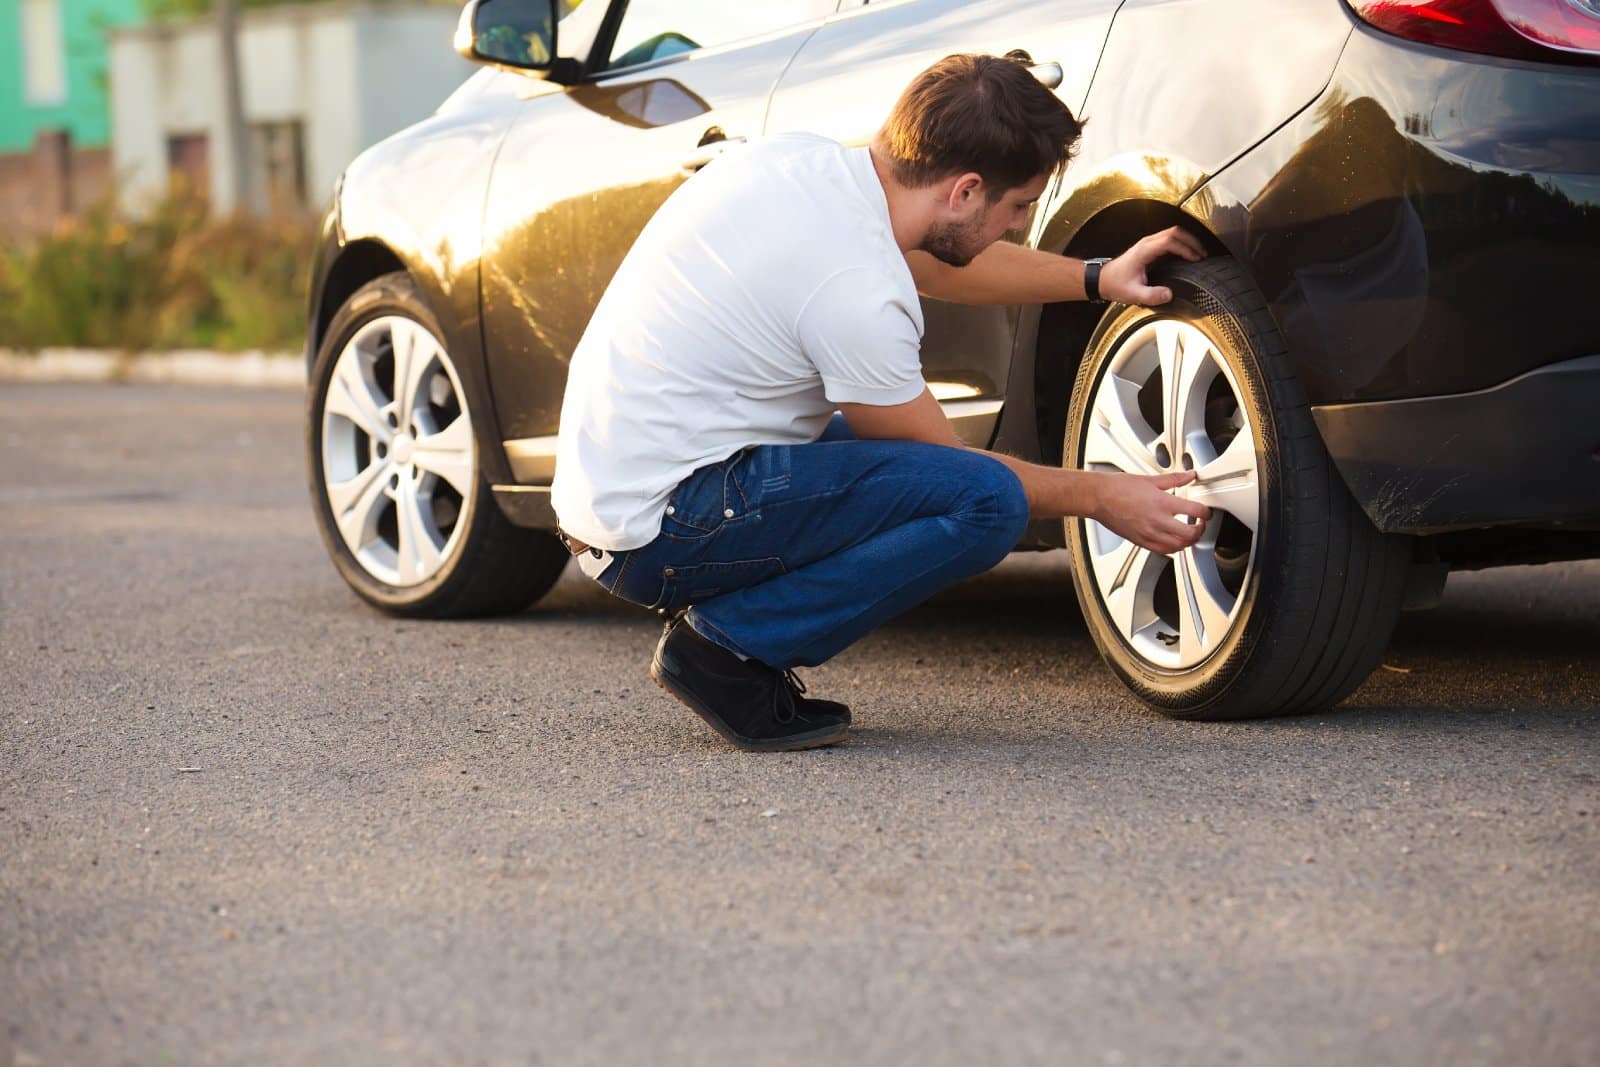 <p class="wp-caption-text">Image Credit: Shutterstock / kozirsky</p>  <p><span>Knowing how to check tire pressure, oil levels, and perform other basic car checks can save you from breakdowns and potential hazards on the road.</span></p>